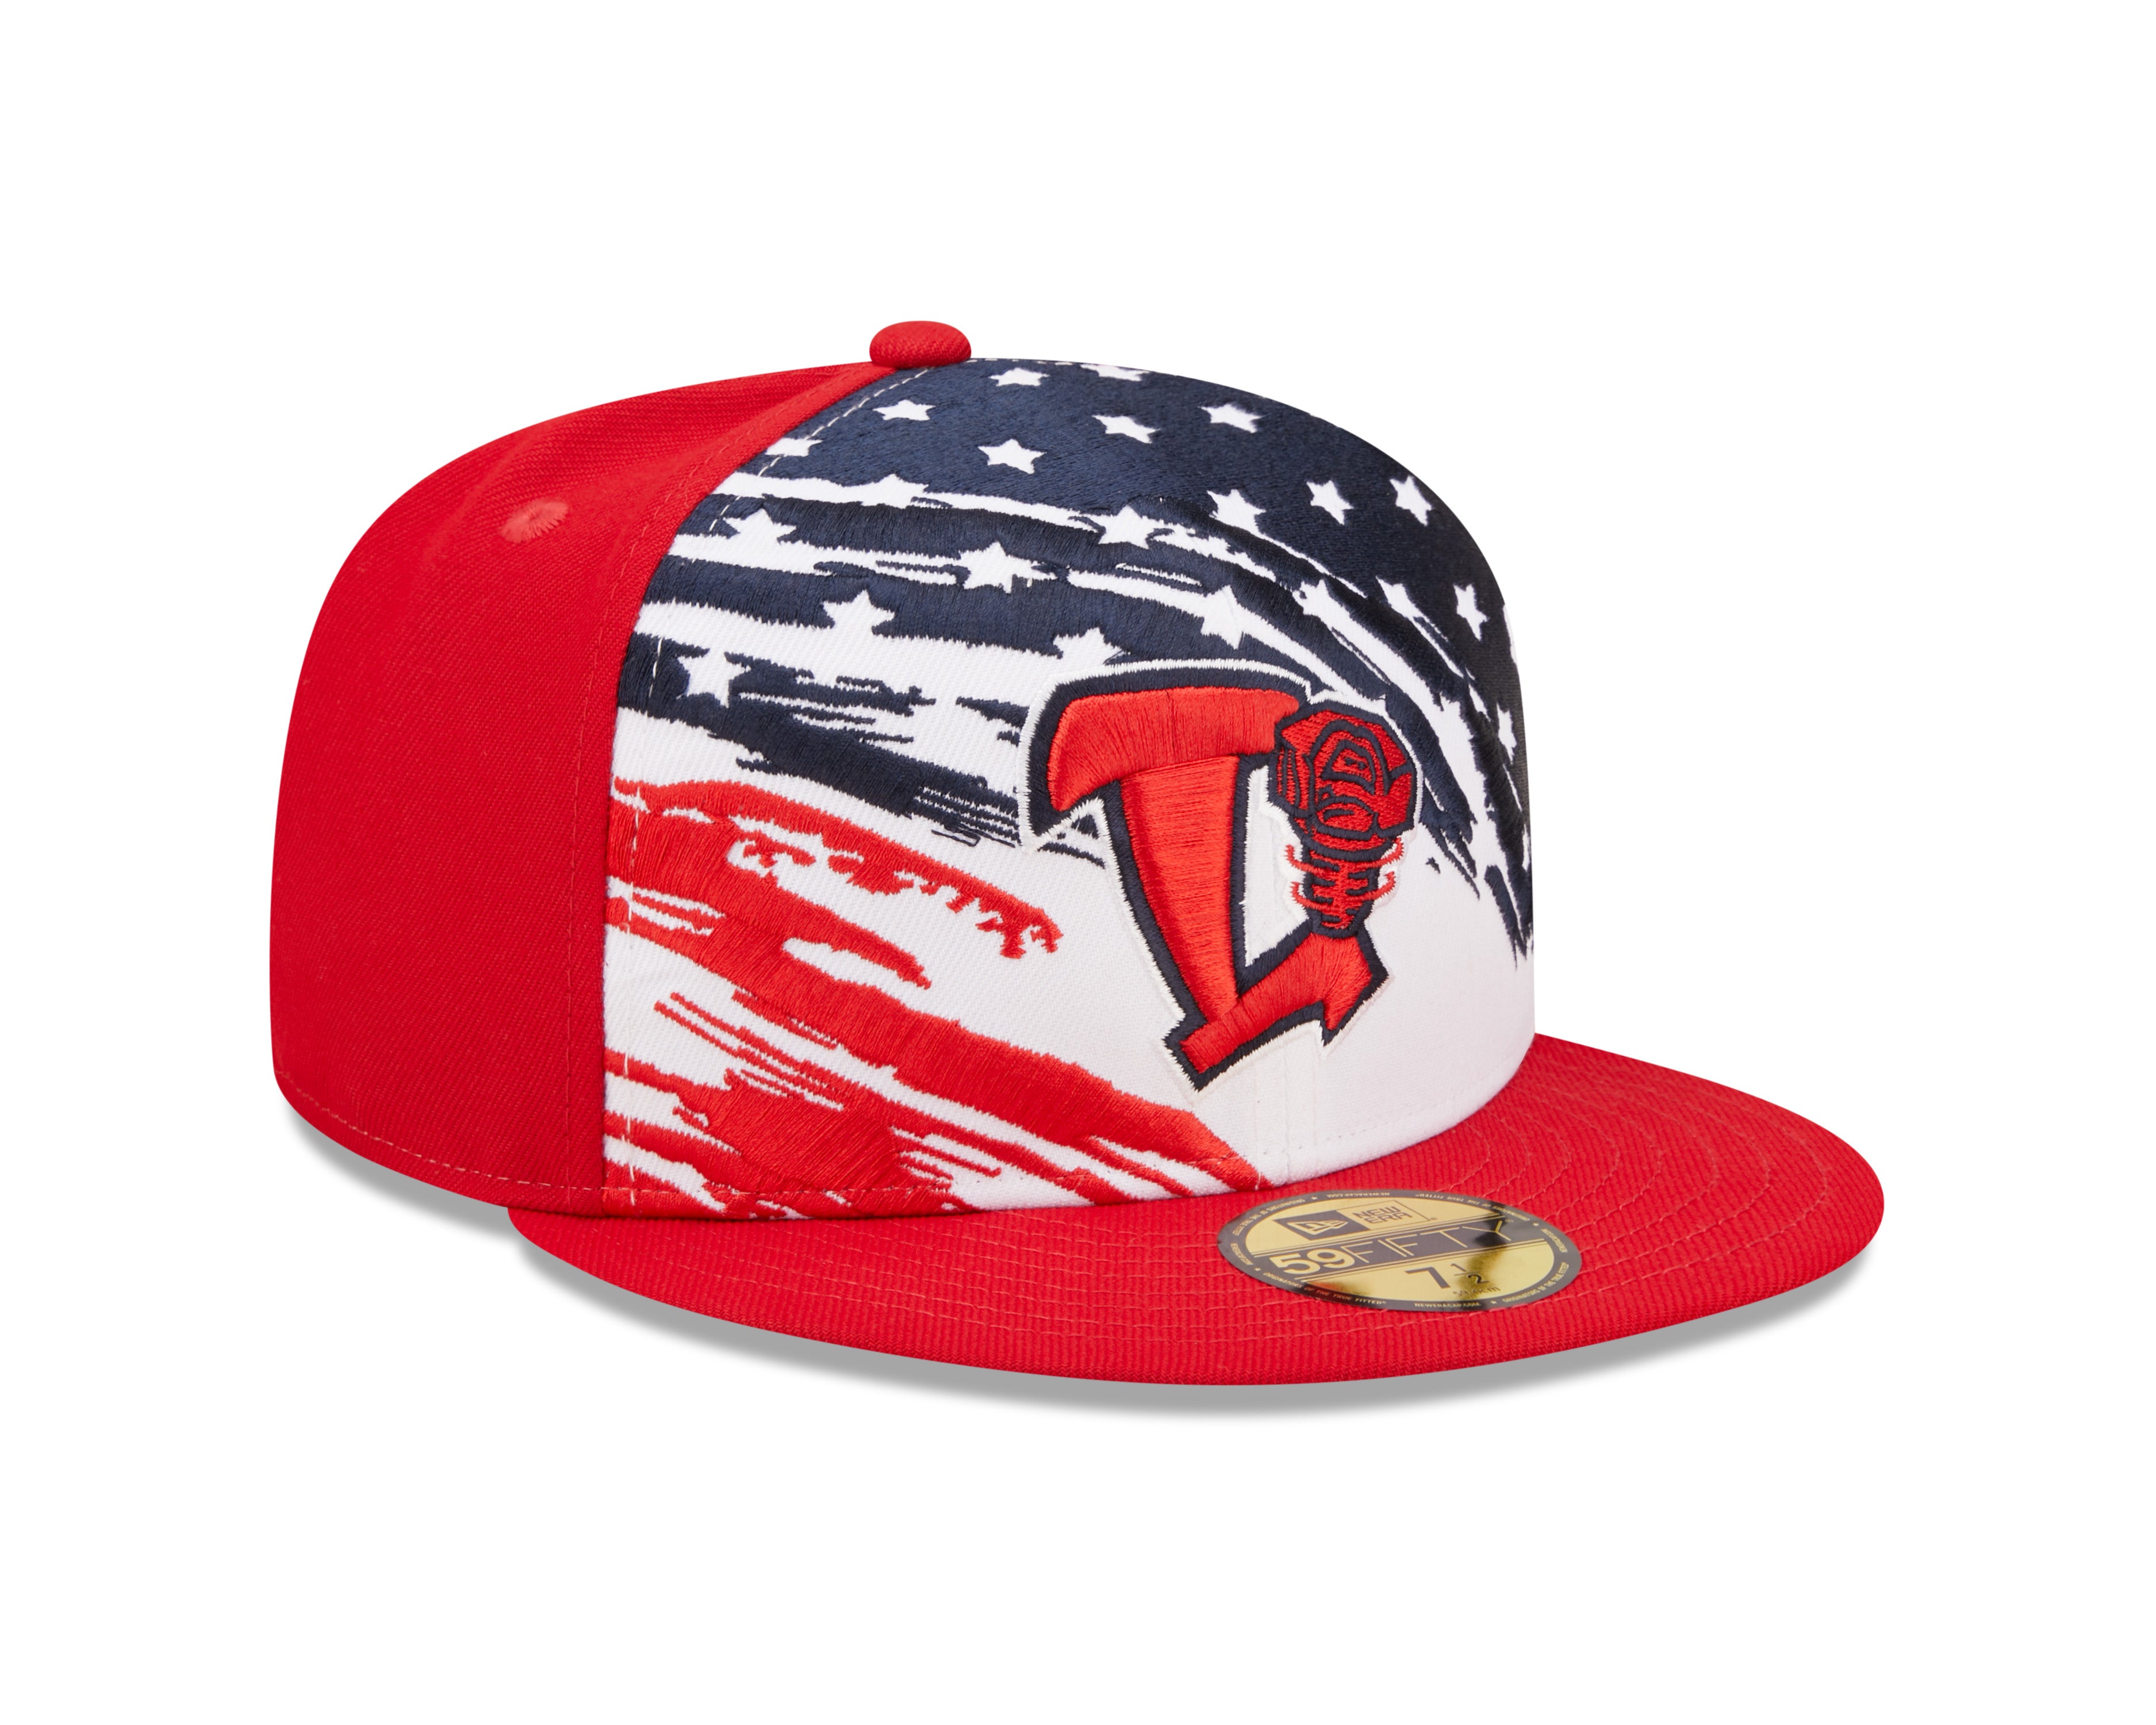 Lansing Lugnuts - Of all of the baseball caps we wear